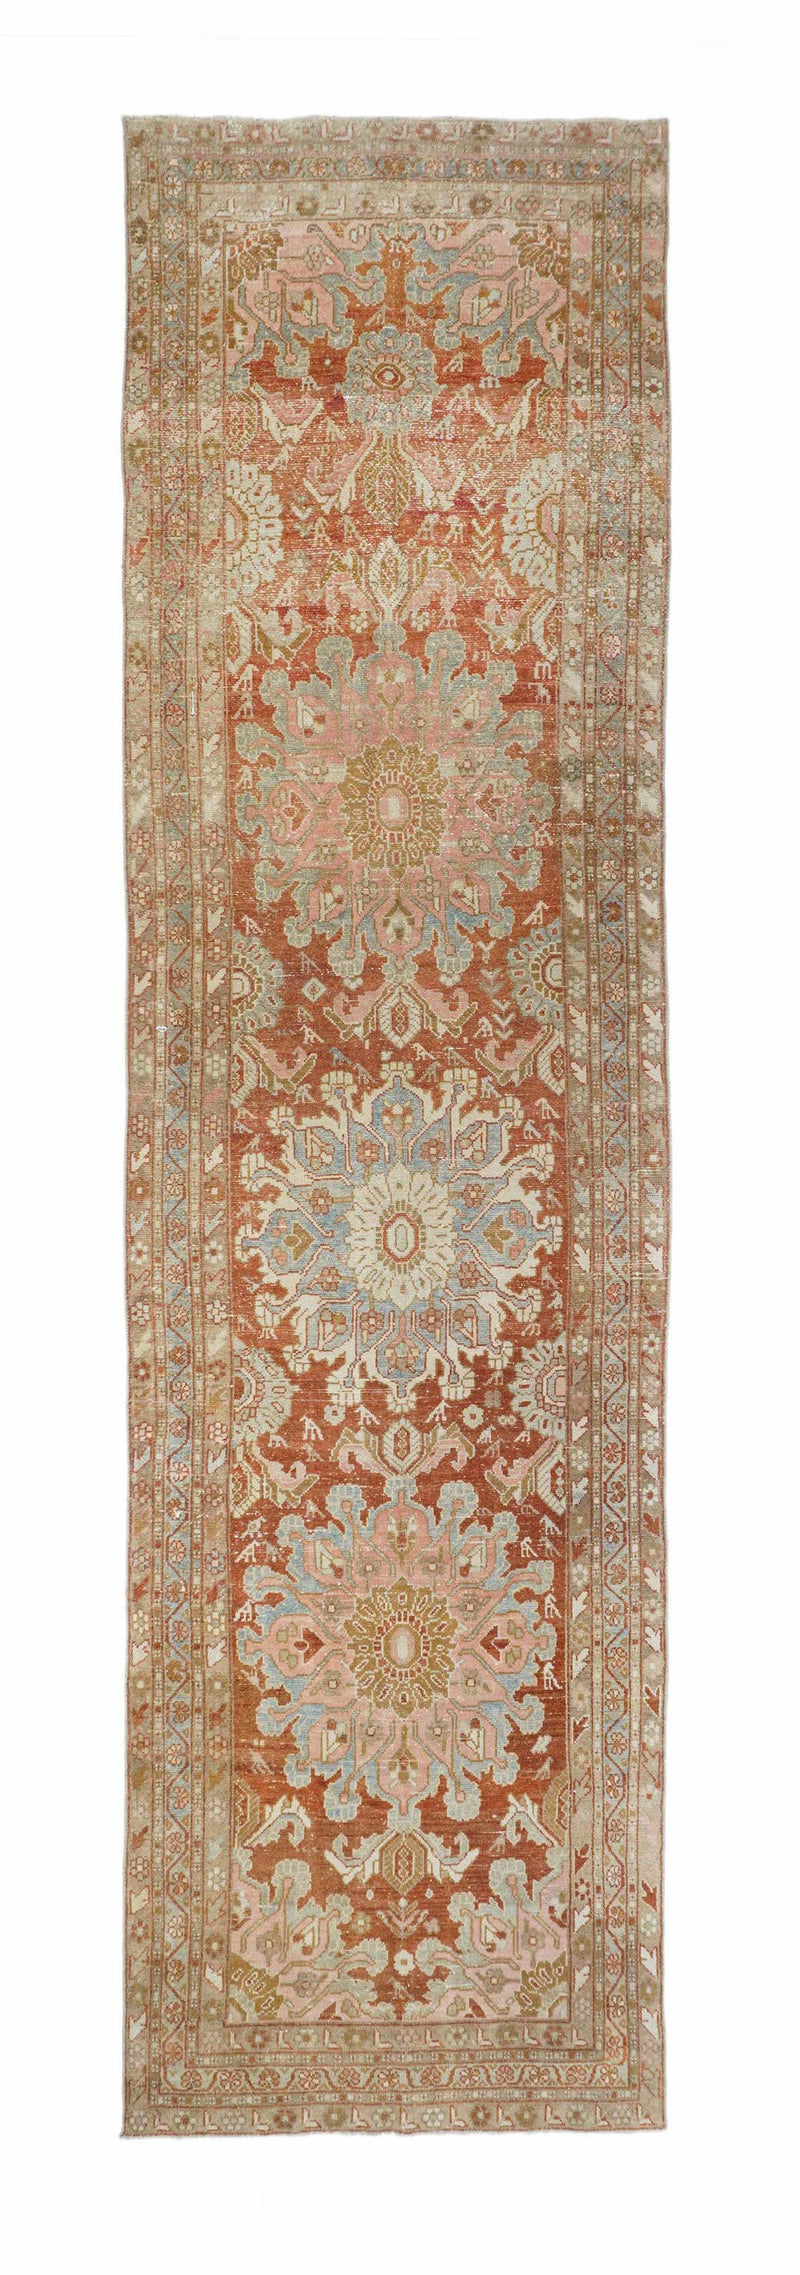 Even Low Pile Malayer Rug